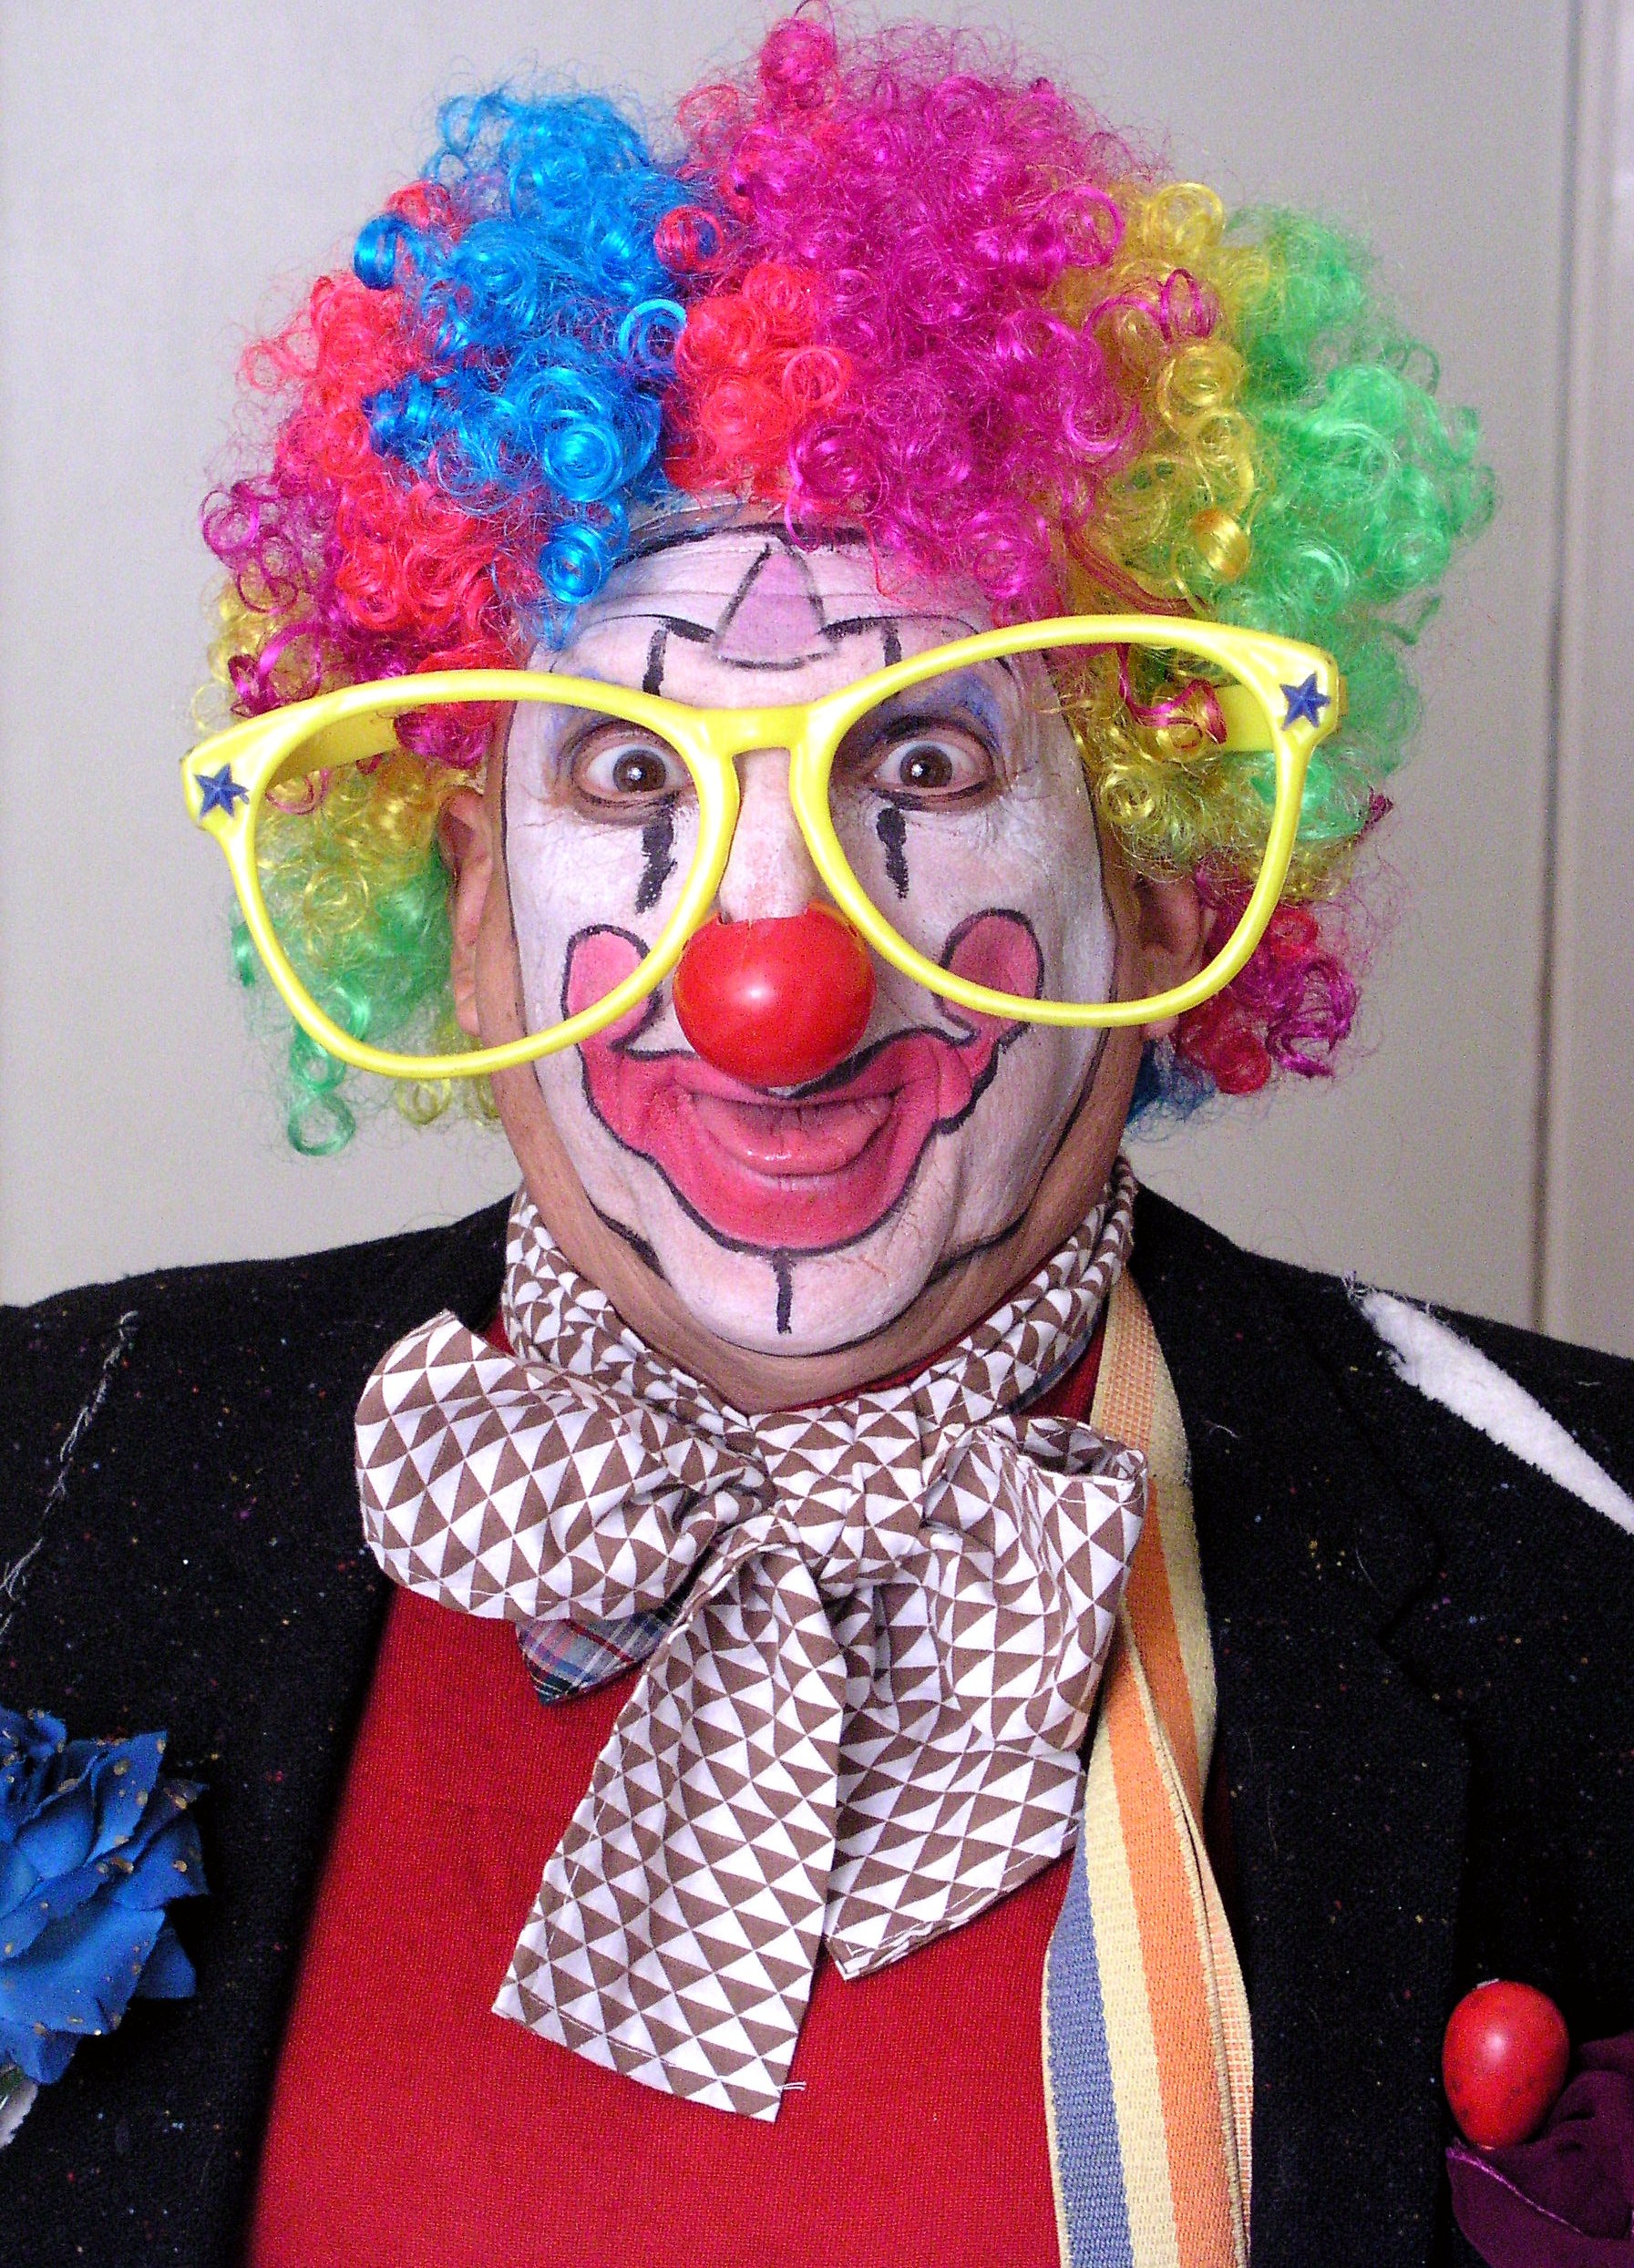 That is one great funny & scary look in Clown